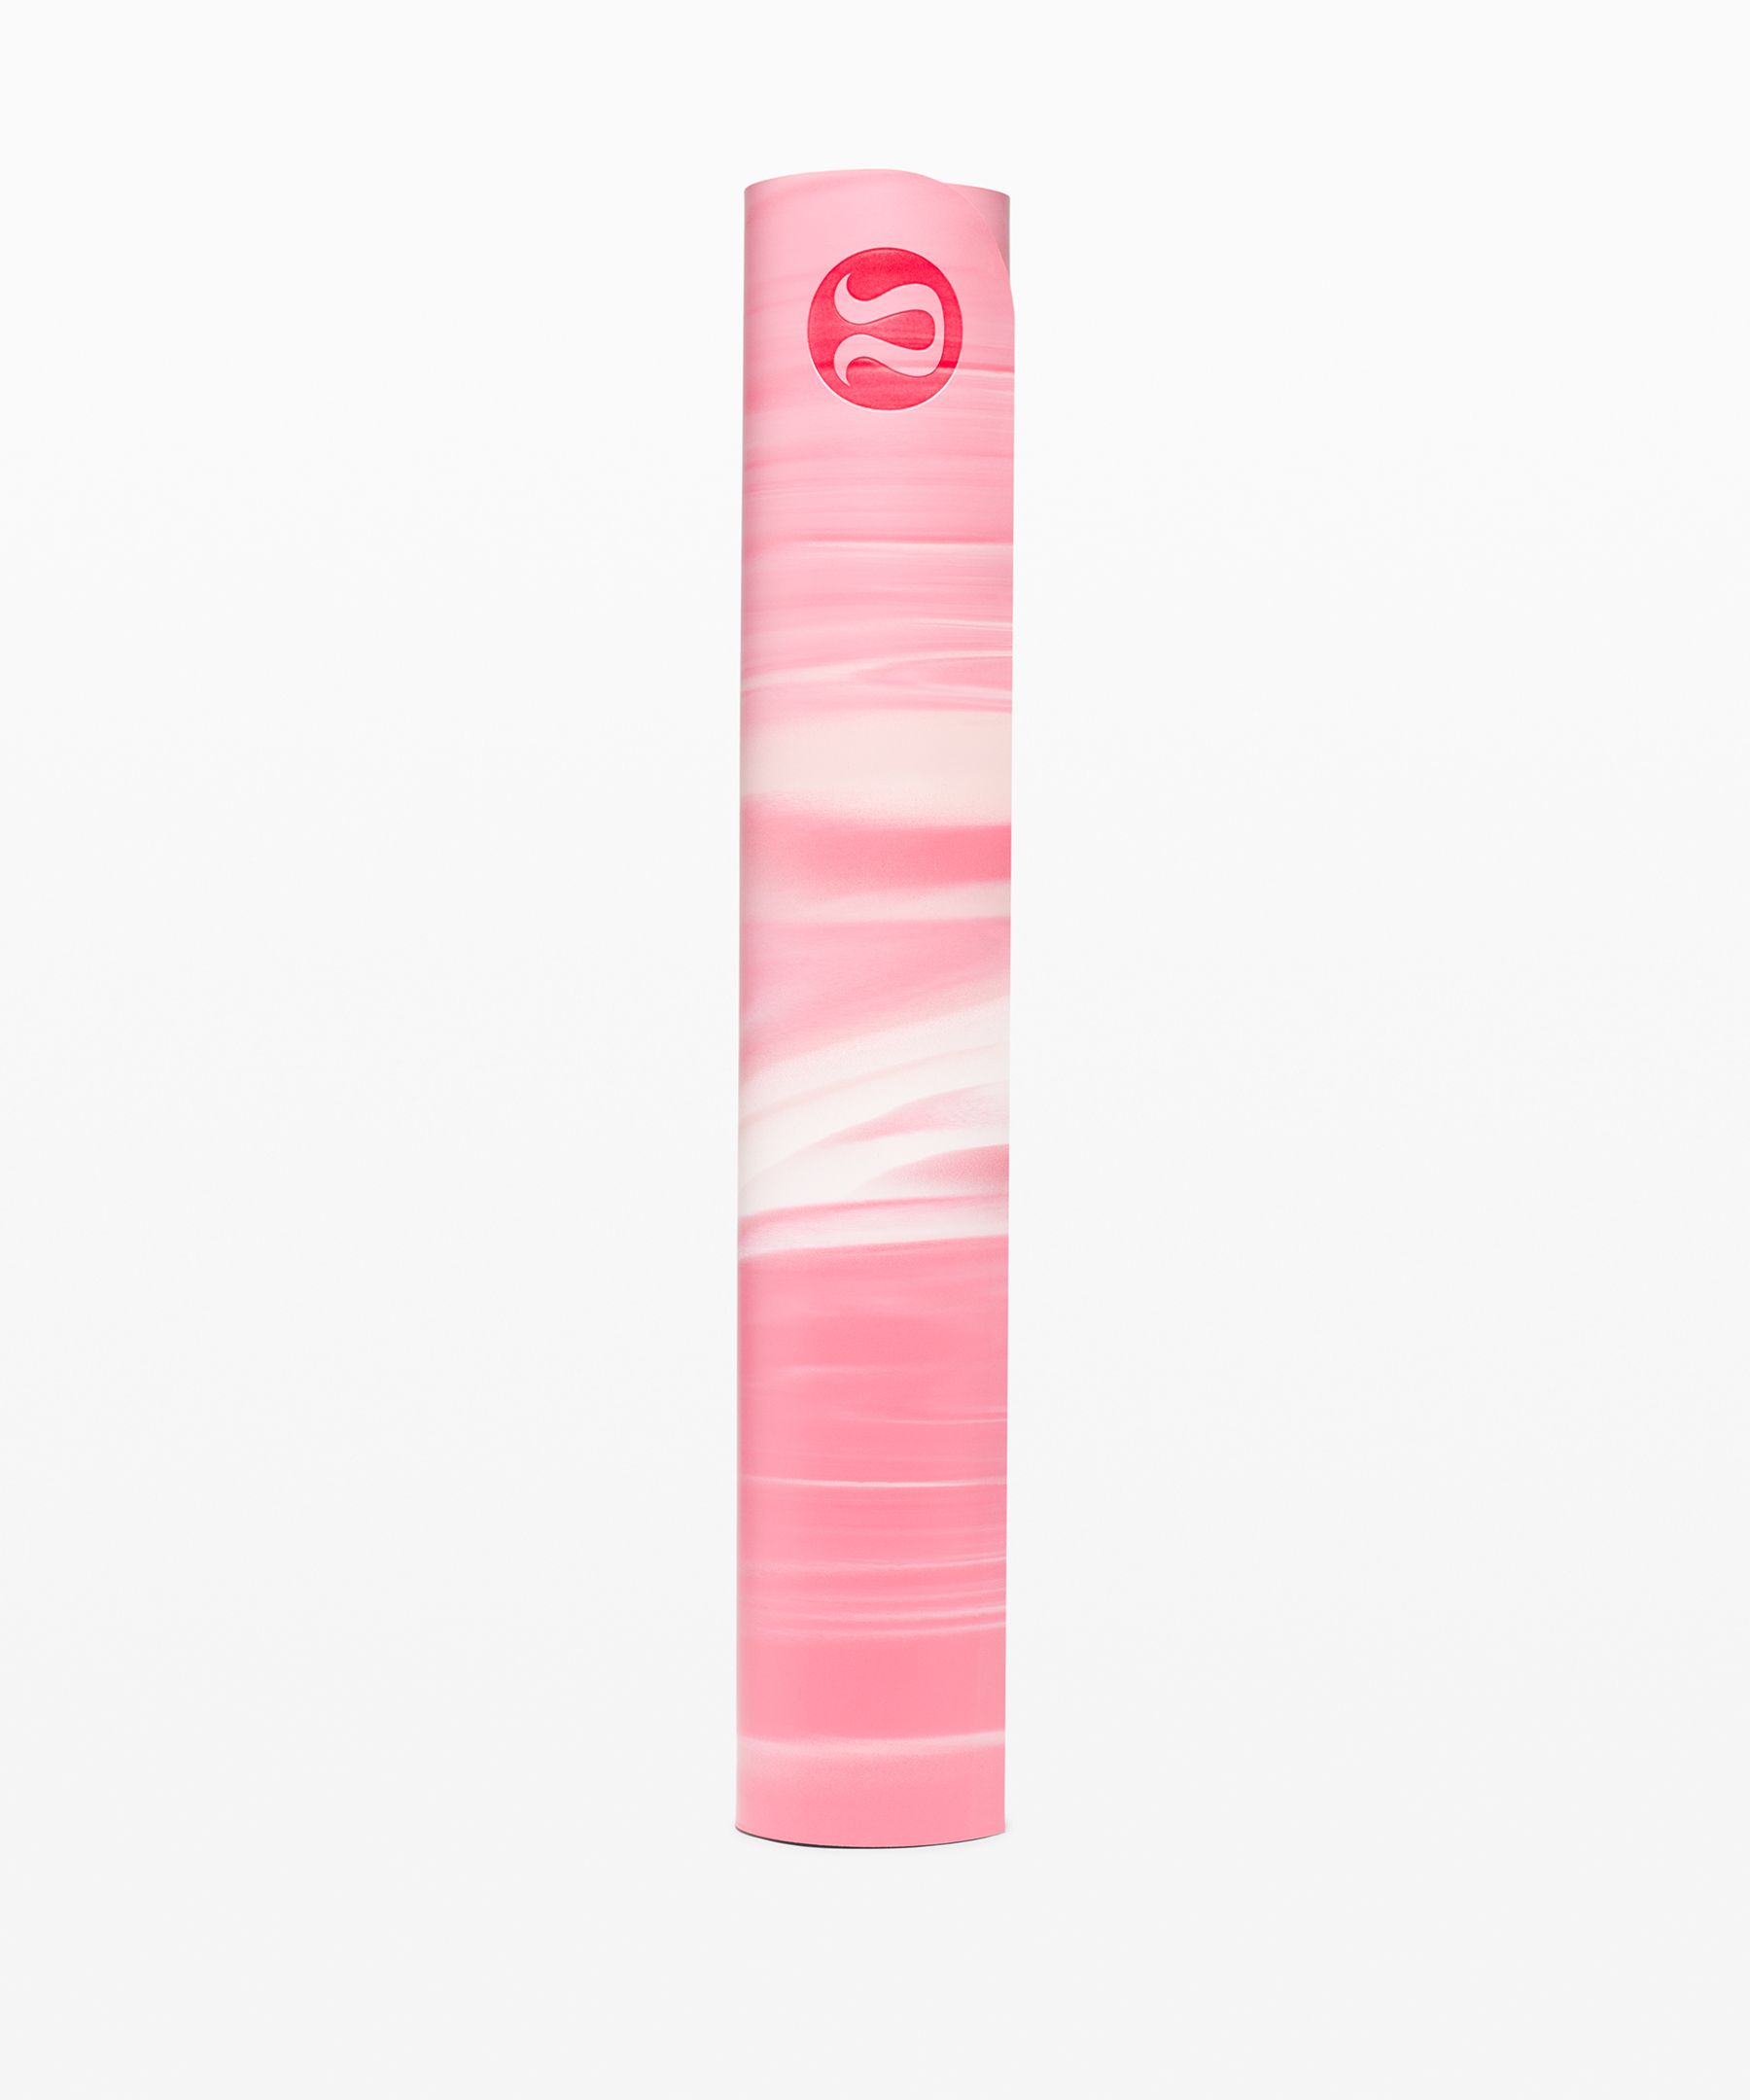 Lululemon Arise Mat Made With Fsc-certified Rubber 5mm In Guava Pink/pink  Mist/white | ModeSens